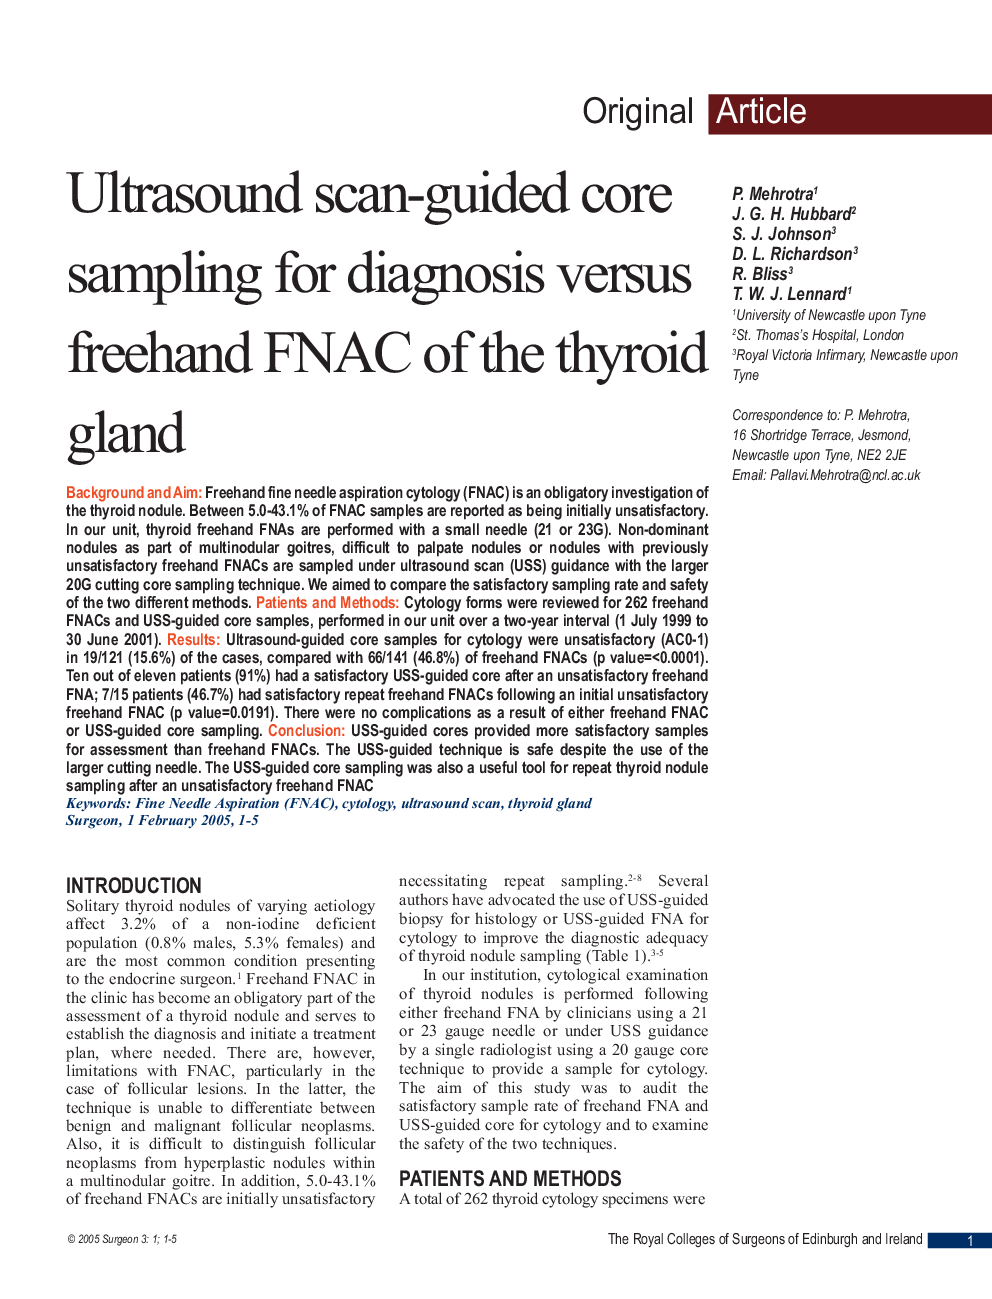 Ultrasound scan-guided core sampling for diagnosis versus freehand FNAC of the thyroid gland